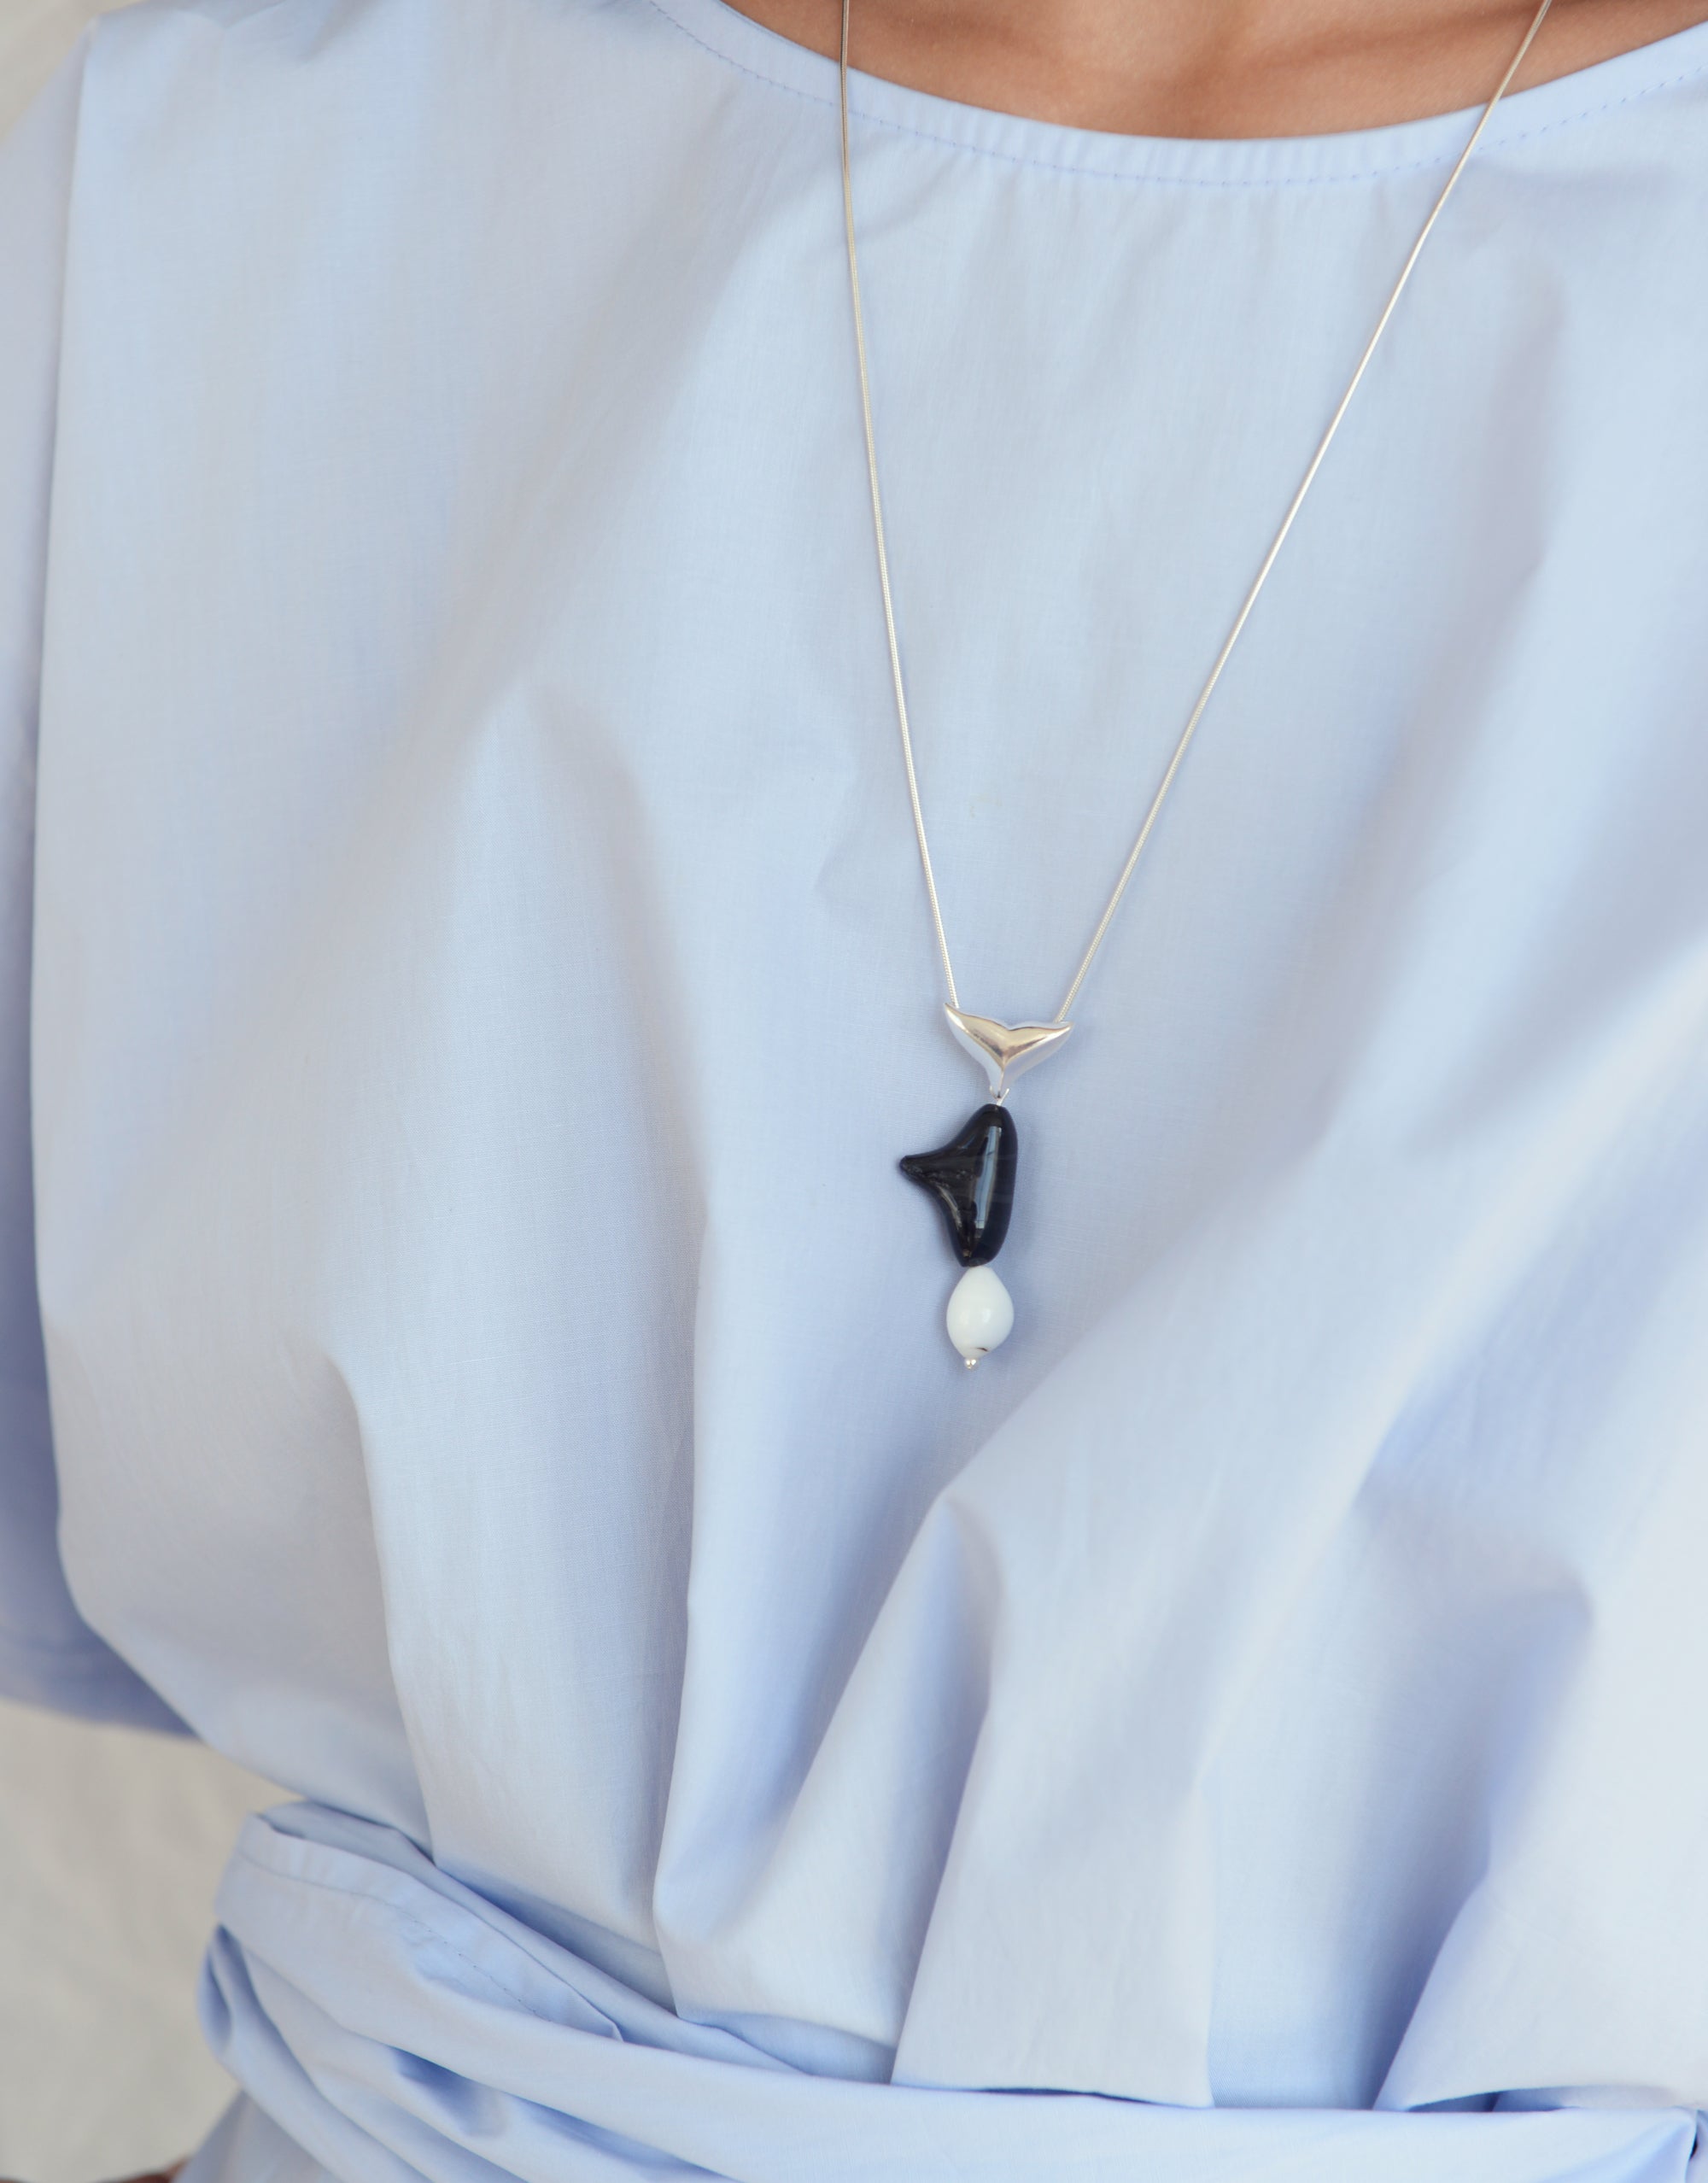 CLED Eco Conscious Sustainable upcycled jewelry made from Eco Gems and sterling silver from recycled glass | Orca Necklace